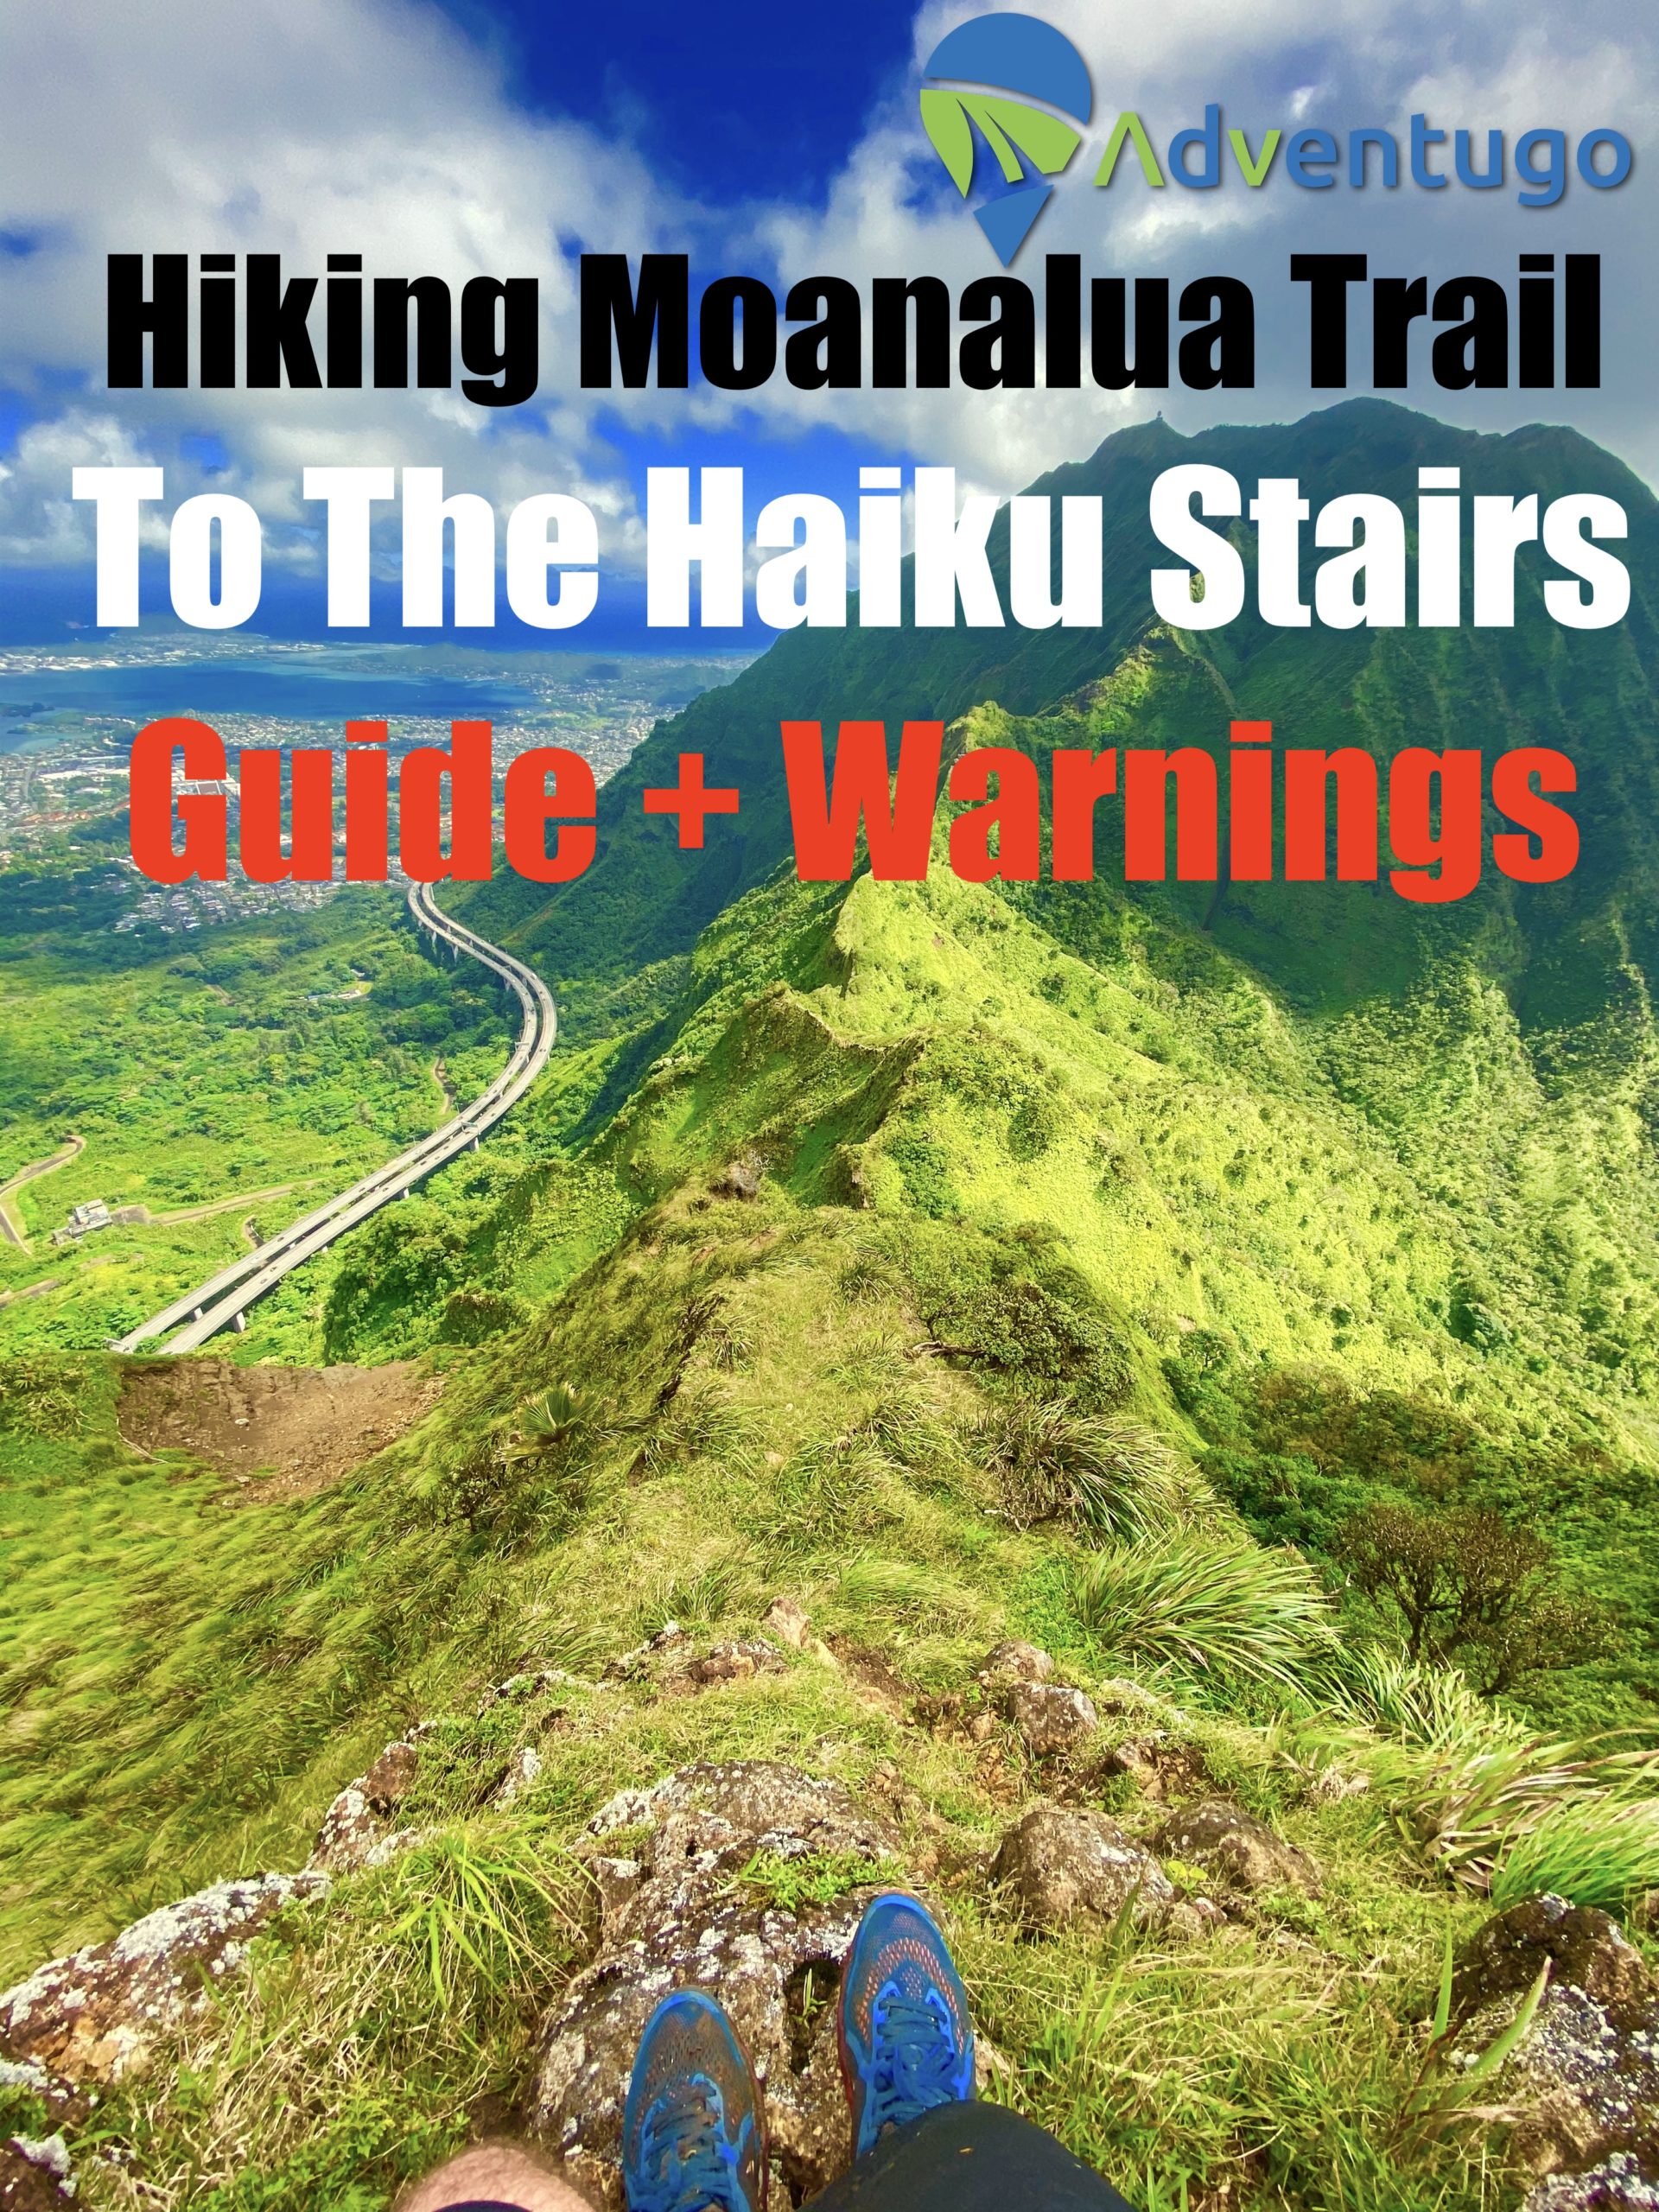 Hiking the Moanalua Valley trail to the Haiku Stairs Ultimate Guide and Warnings